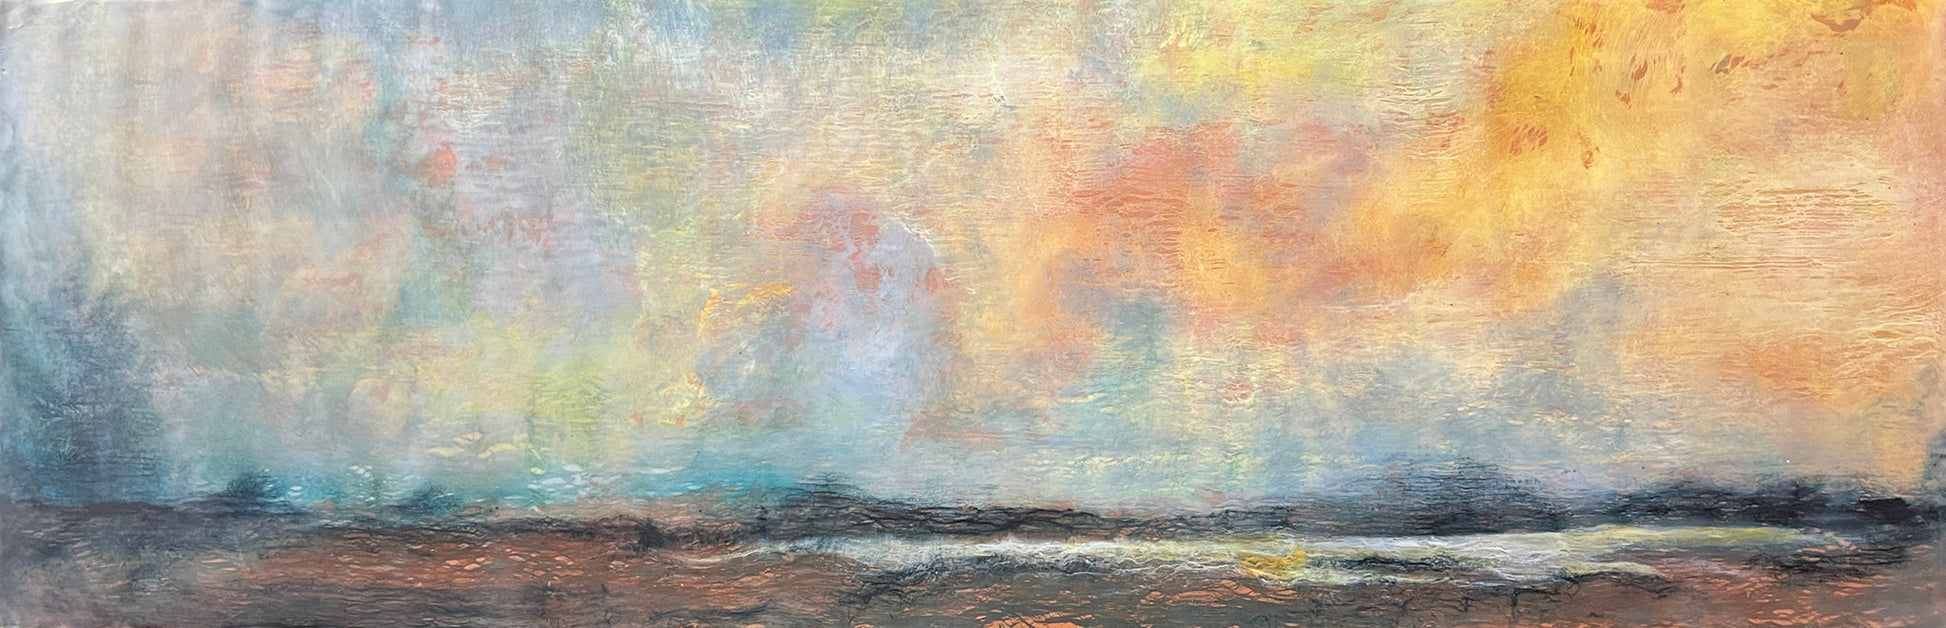 Abstract painting depicting the sky above a field. The sky is a multitude of colors all blending seamlessly together. The bottom portion of the painting is a darker brown and black color. 12"x36" encaustic by Shannon Mello